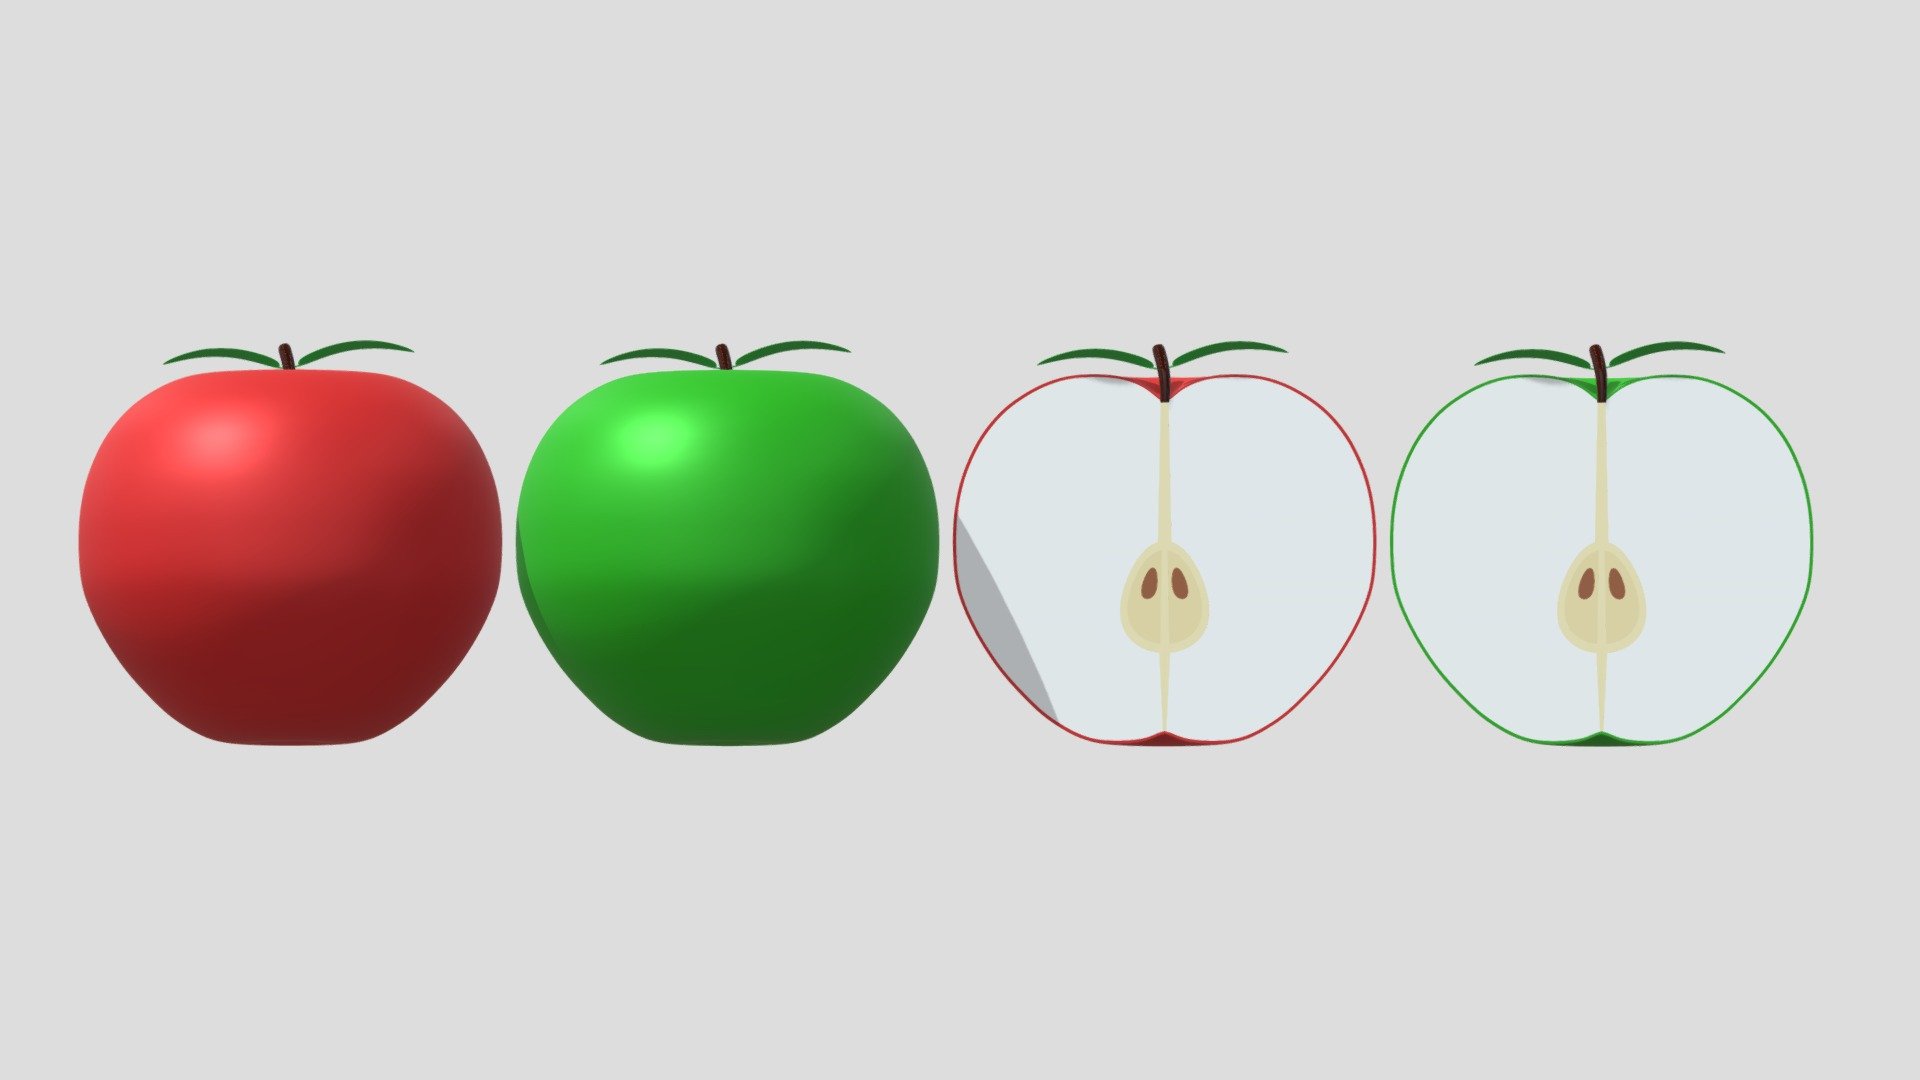 -Cartoon Apple Fruit and Slice.

-1 full apple , Vert : 13,136, Poly : 12,992.

-1 half apple, Vert : 9,979, Poly : 9,535.

-This product was created in Blender 2.8.

-Formats: blend, fbx, obj, c4d, dae, abc, stl, glb.

-We hope you enjoy this model.

-Thank you 3d model